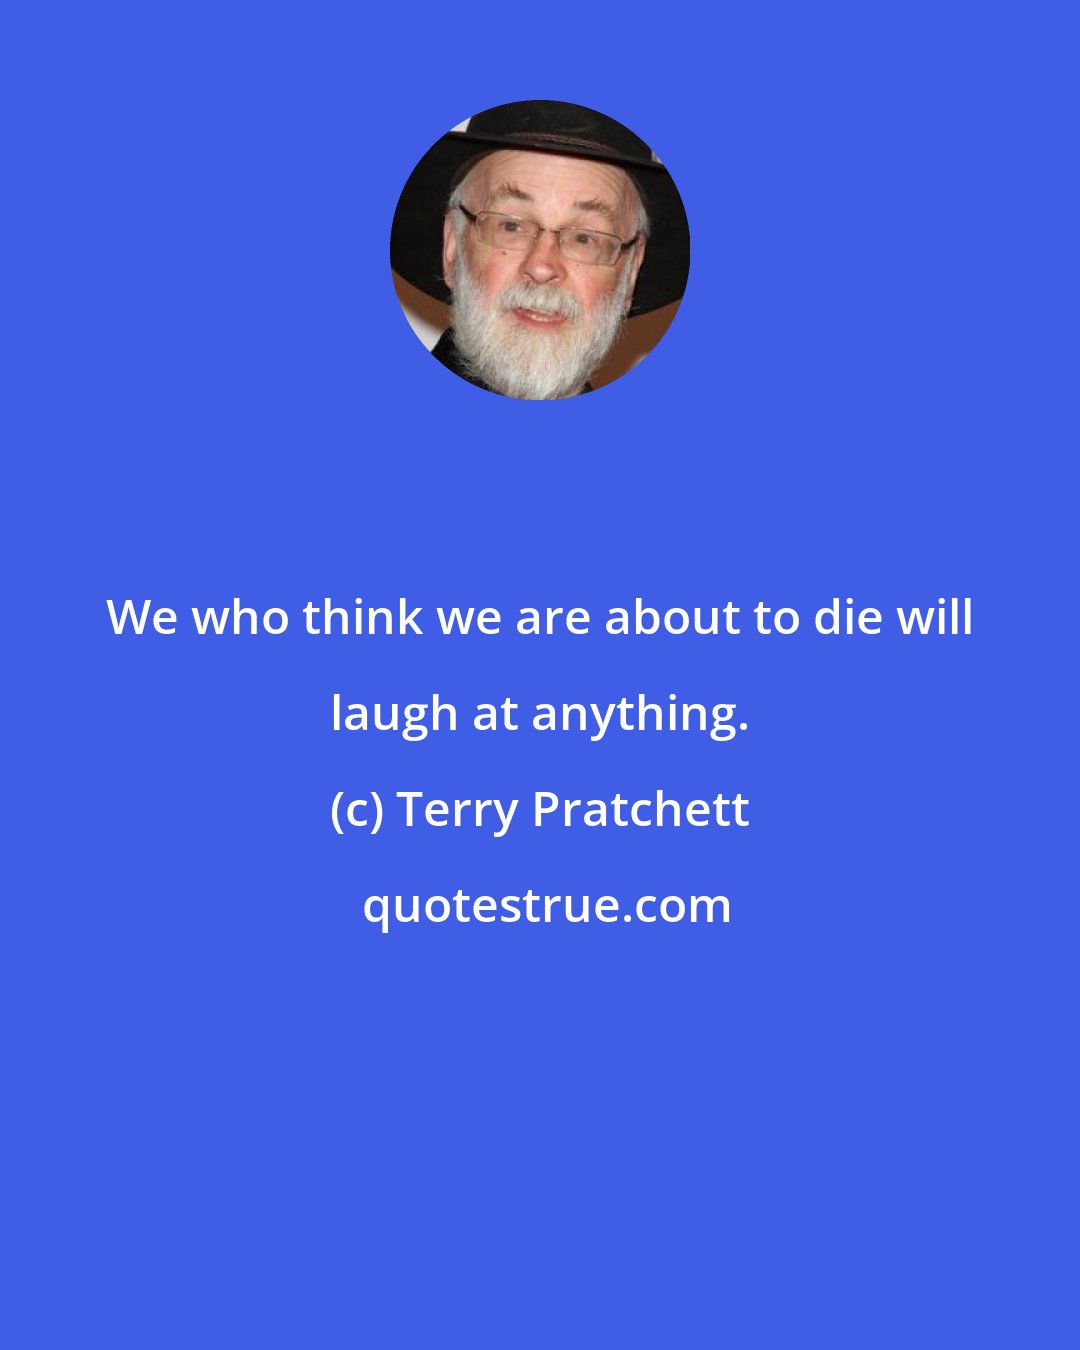 Terry Pratchett: We who think we are about to die will laugh at anything.